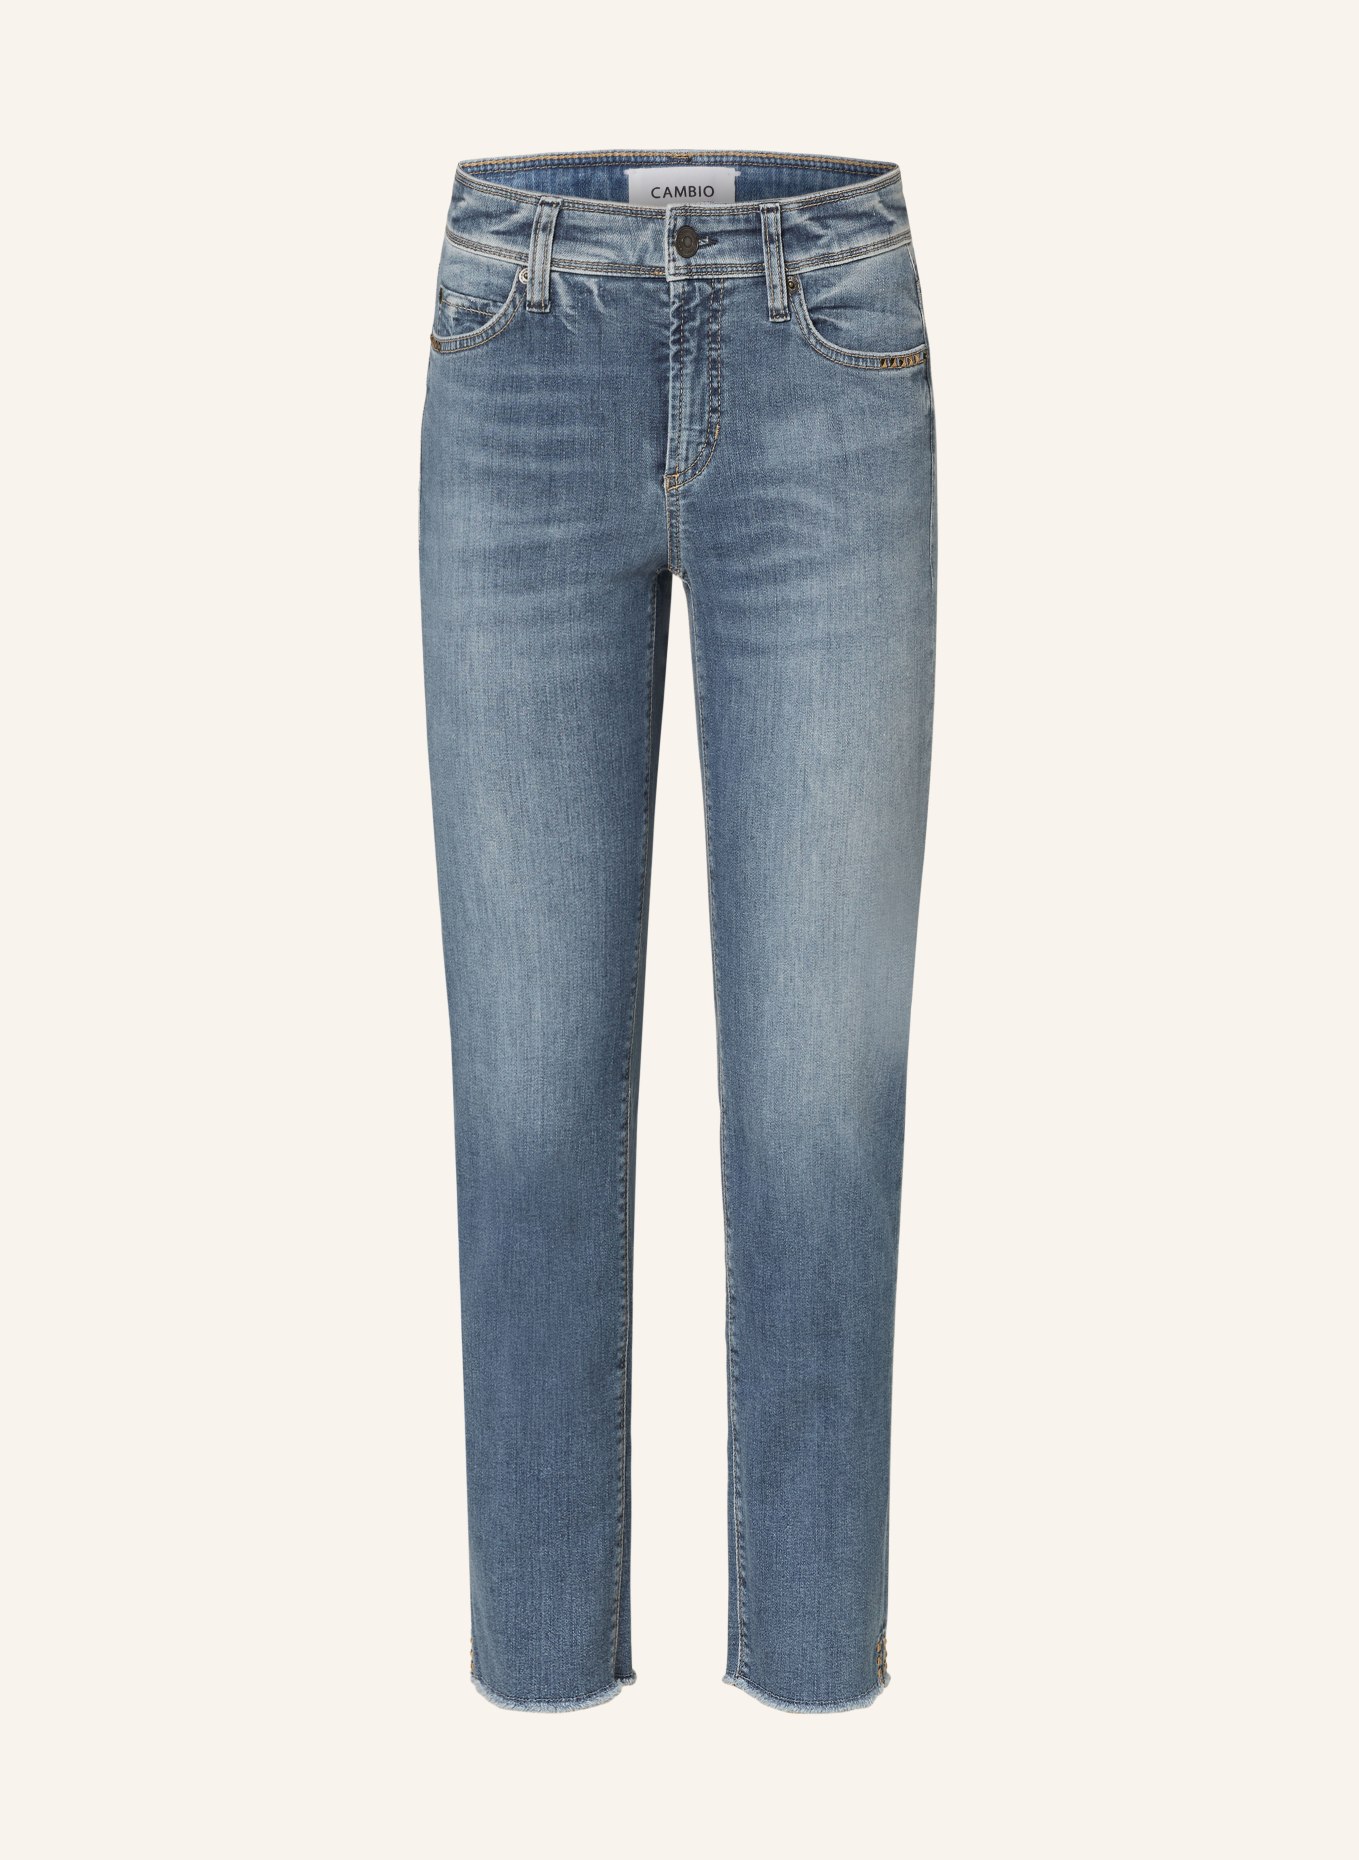 CAMBIO 7/8 jeans PIPER with rivets, Color: 5154 summer used fringed hem (Image 1)